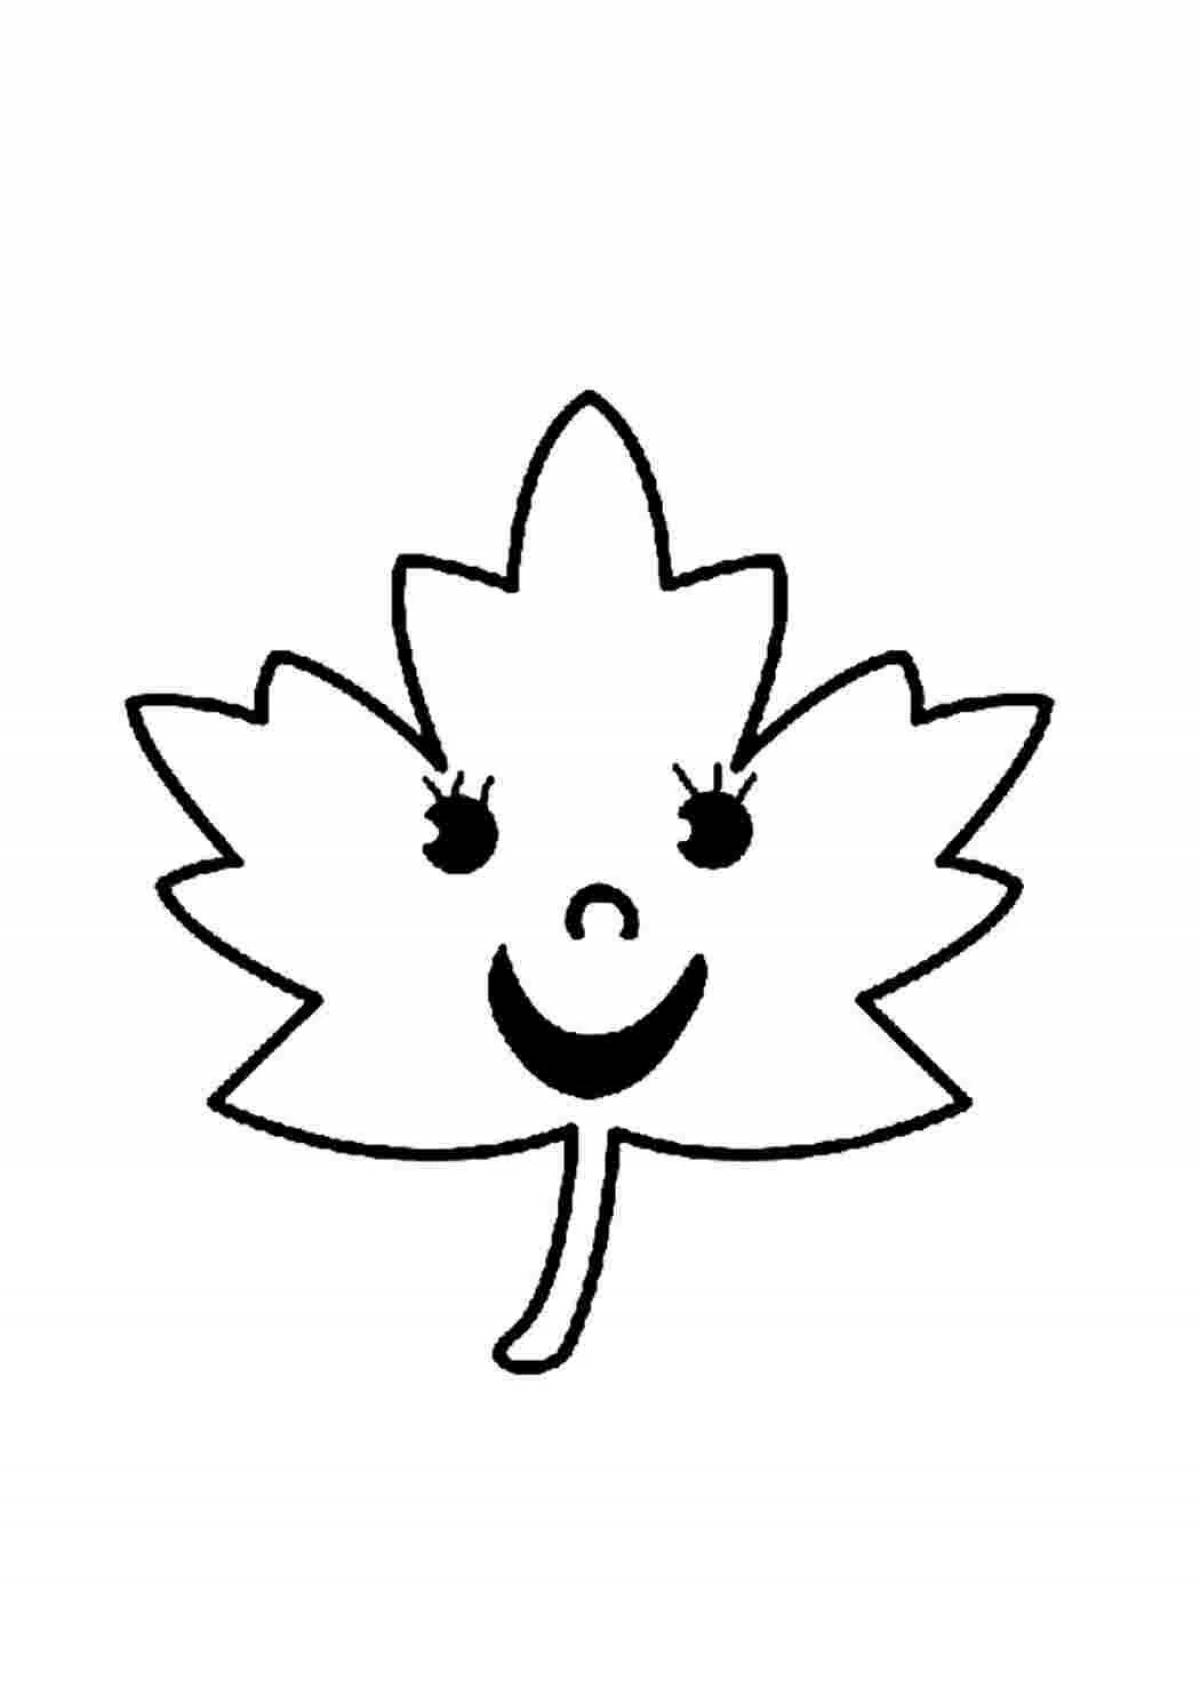 Fun maple leaf coloring book for kids